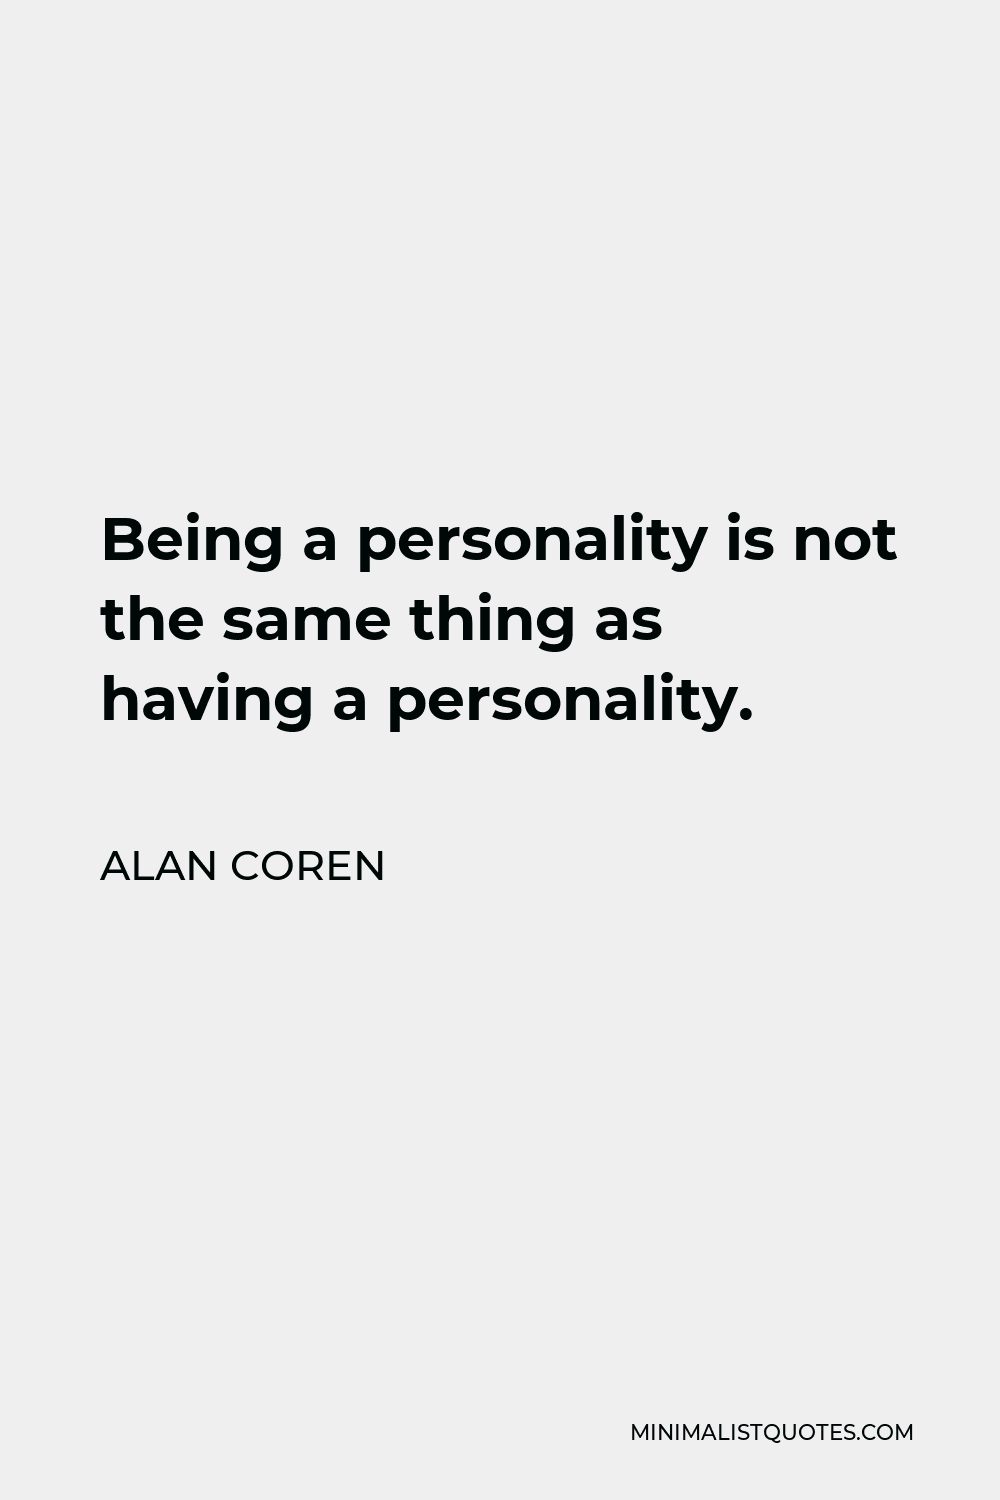 Alan Coren Quote - Being a personality is not the same thing as having a personality.